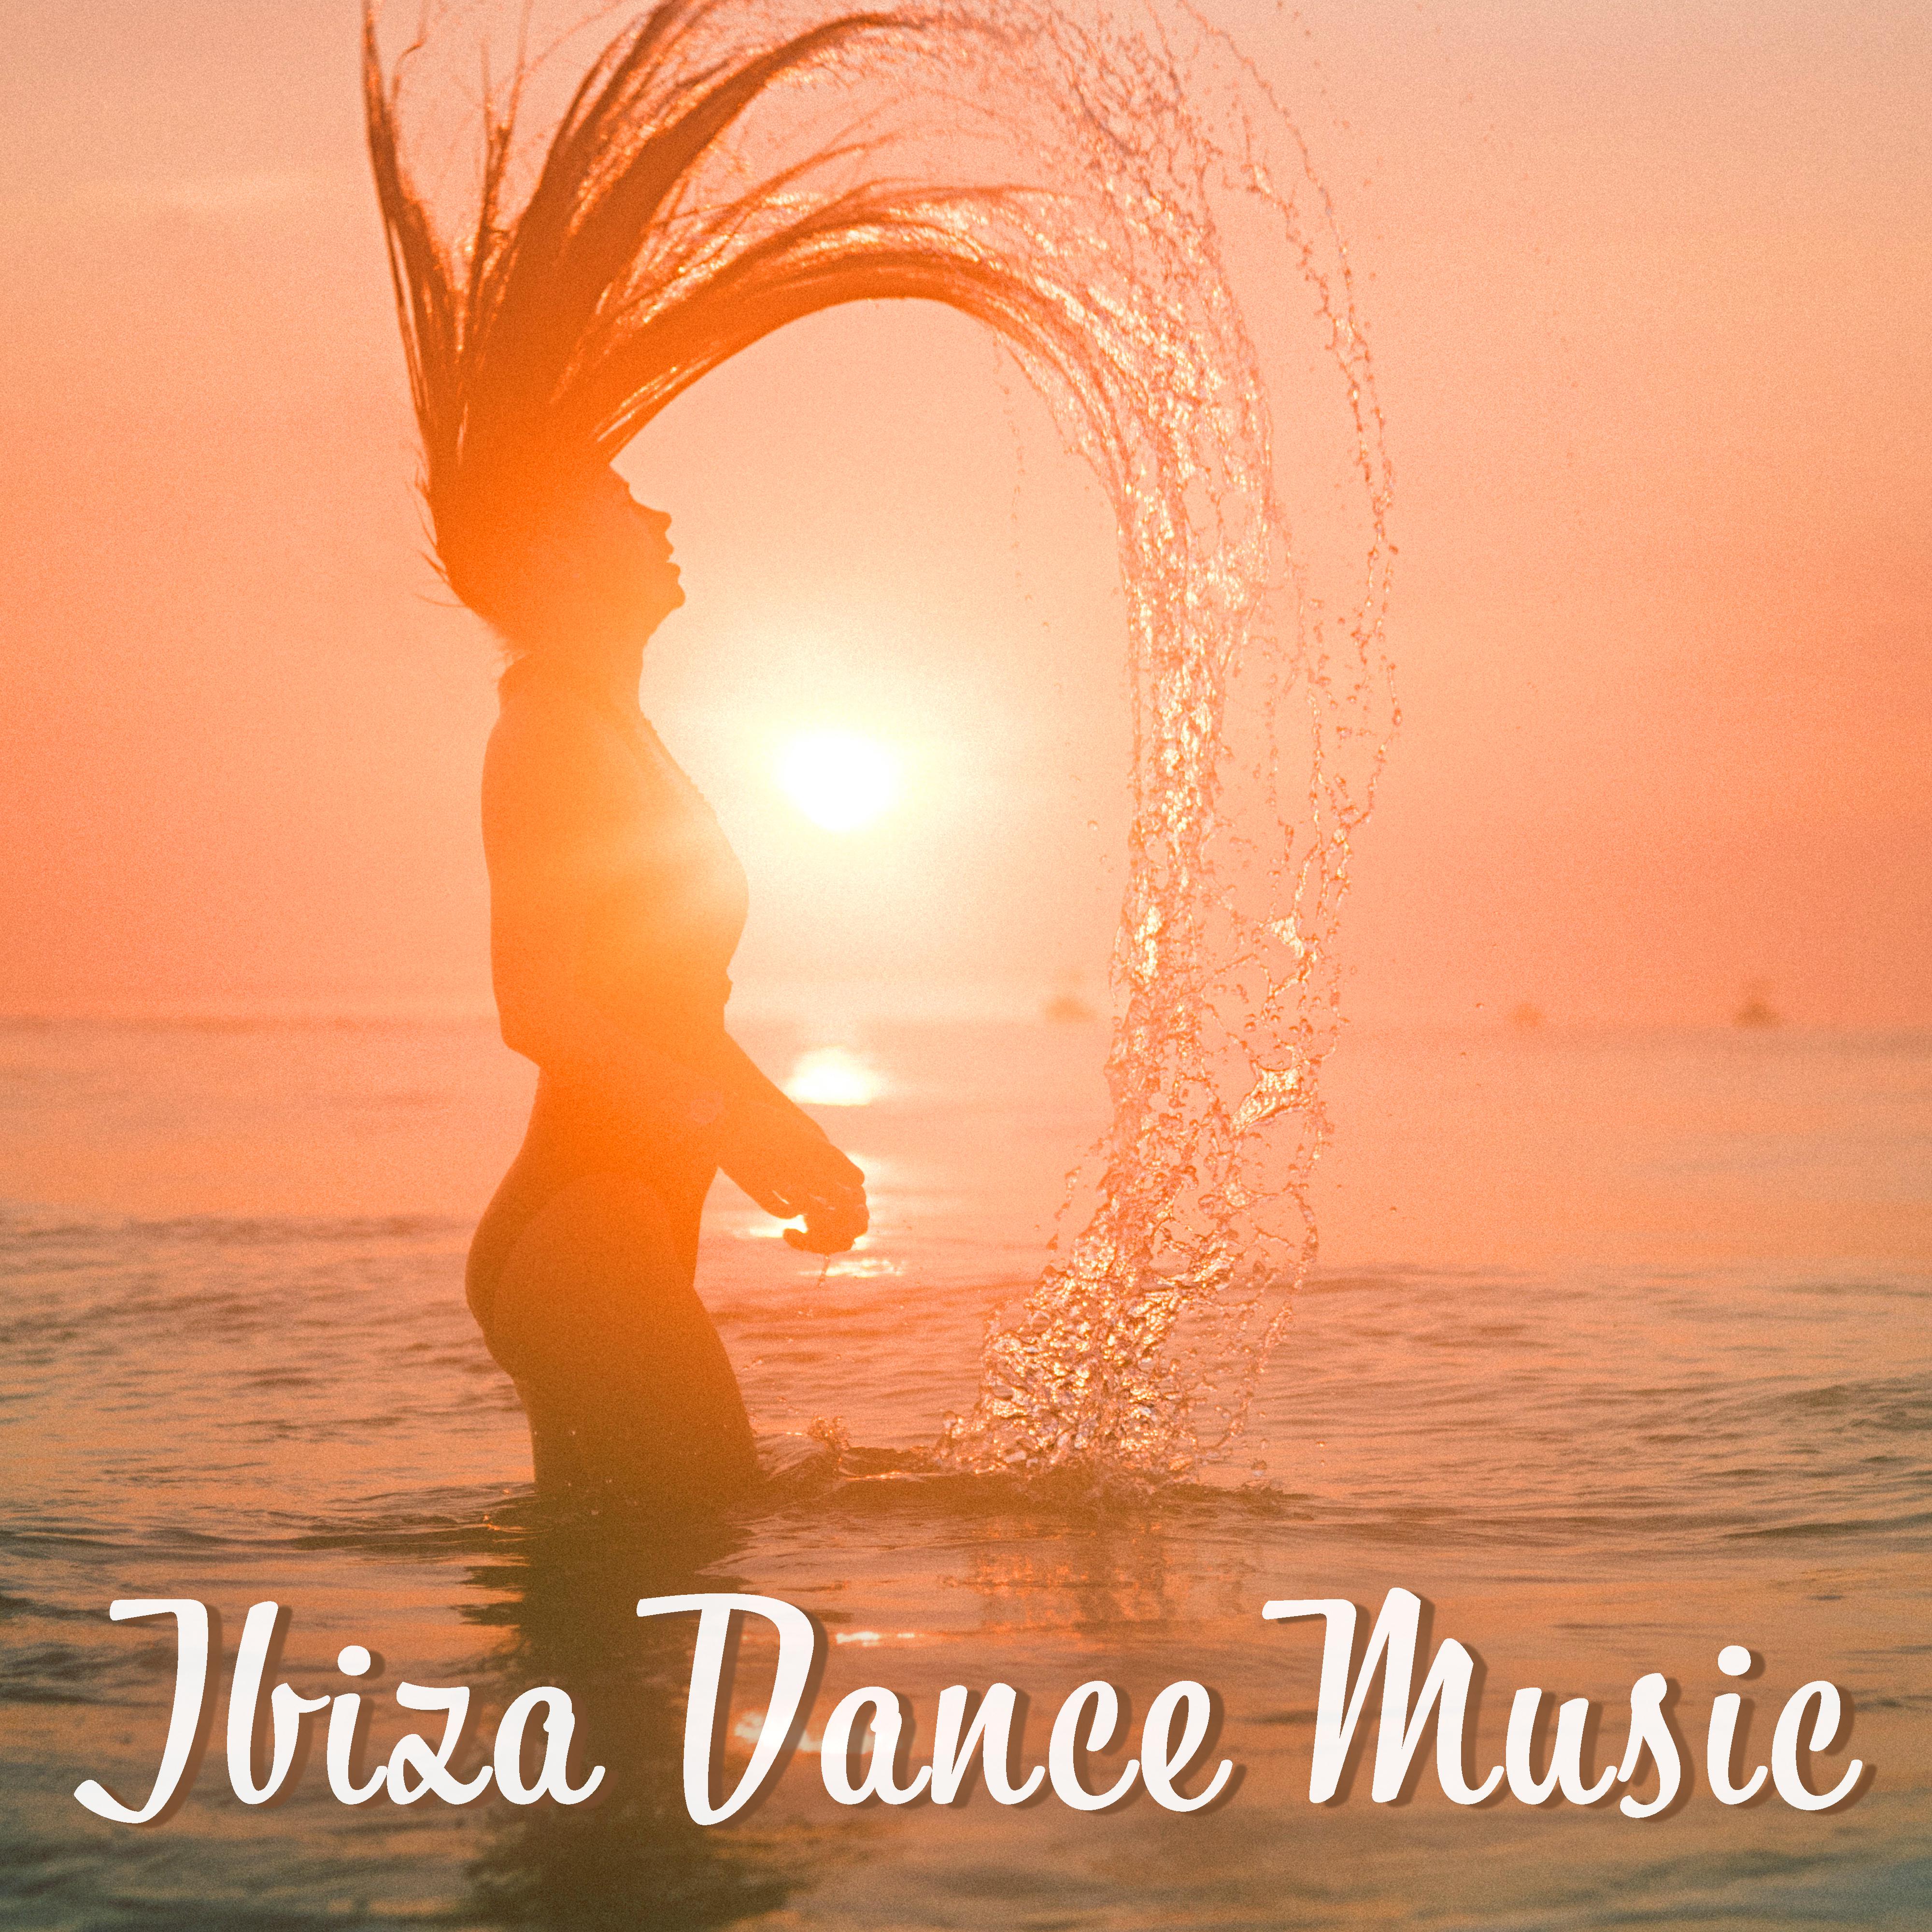 Ibiza Dance Music – Chill Out Beats, Summer Party, Beach Music All Night, Holiday Vibes